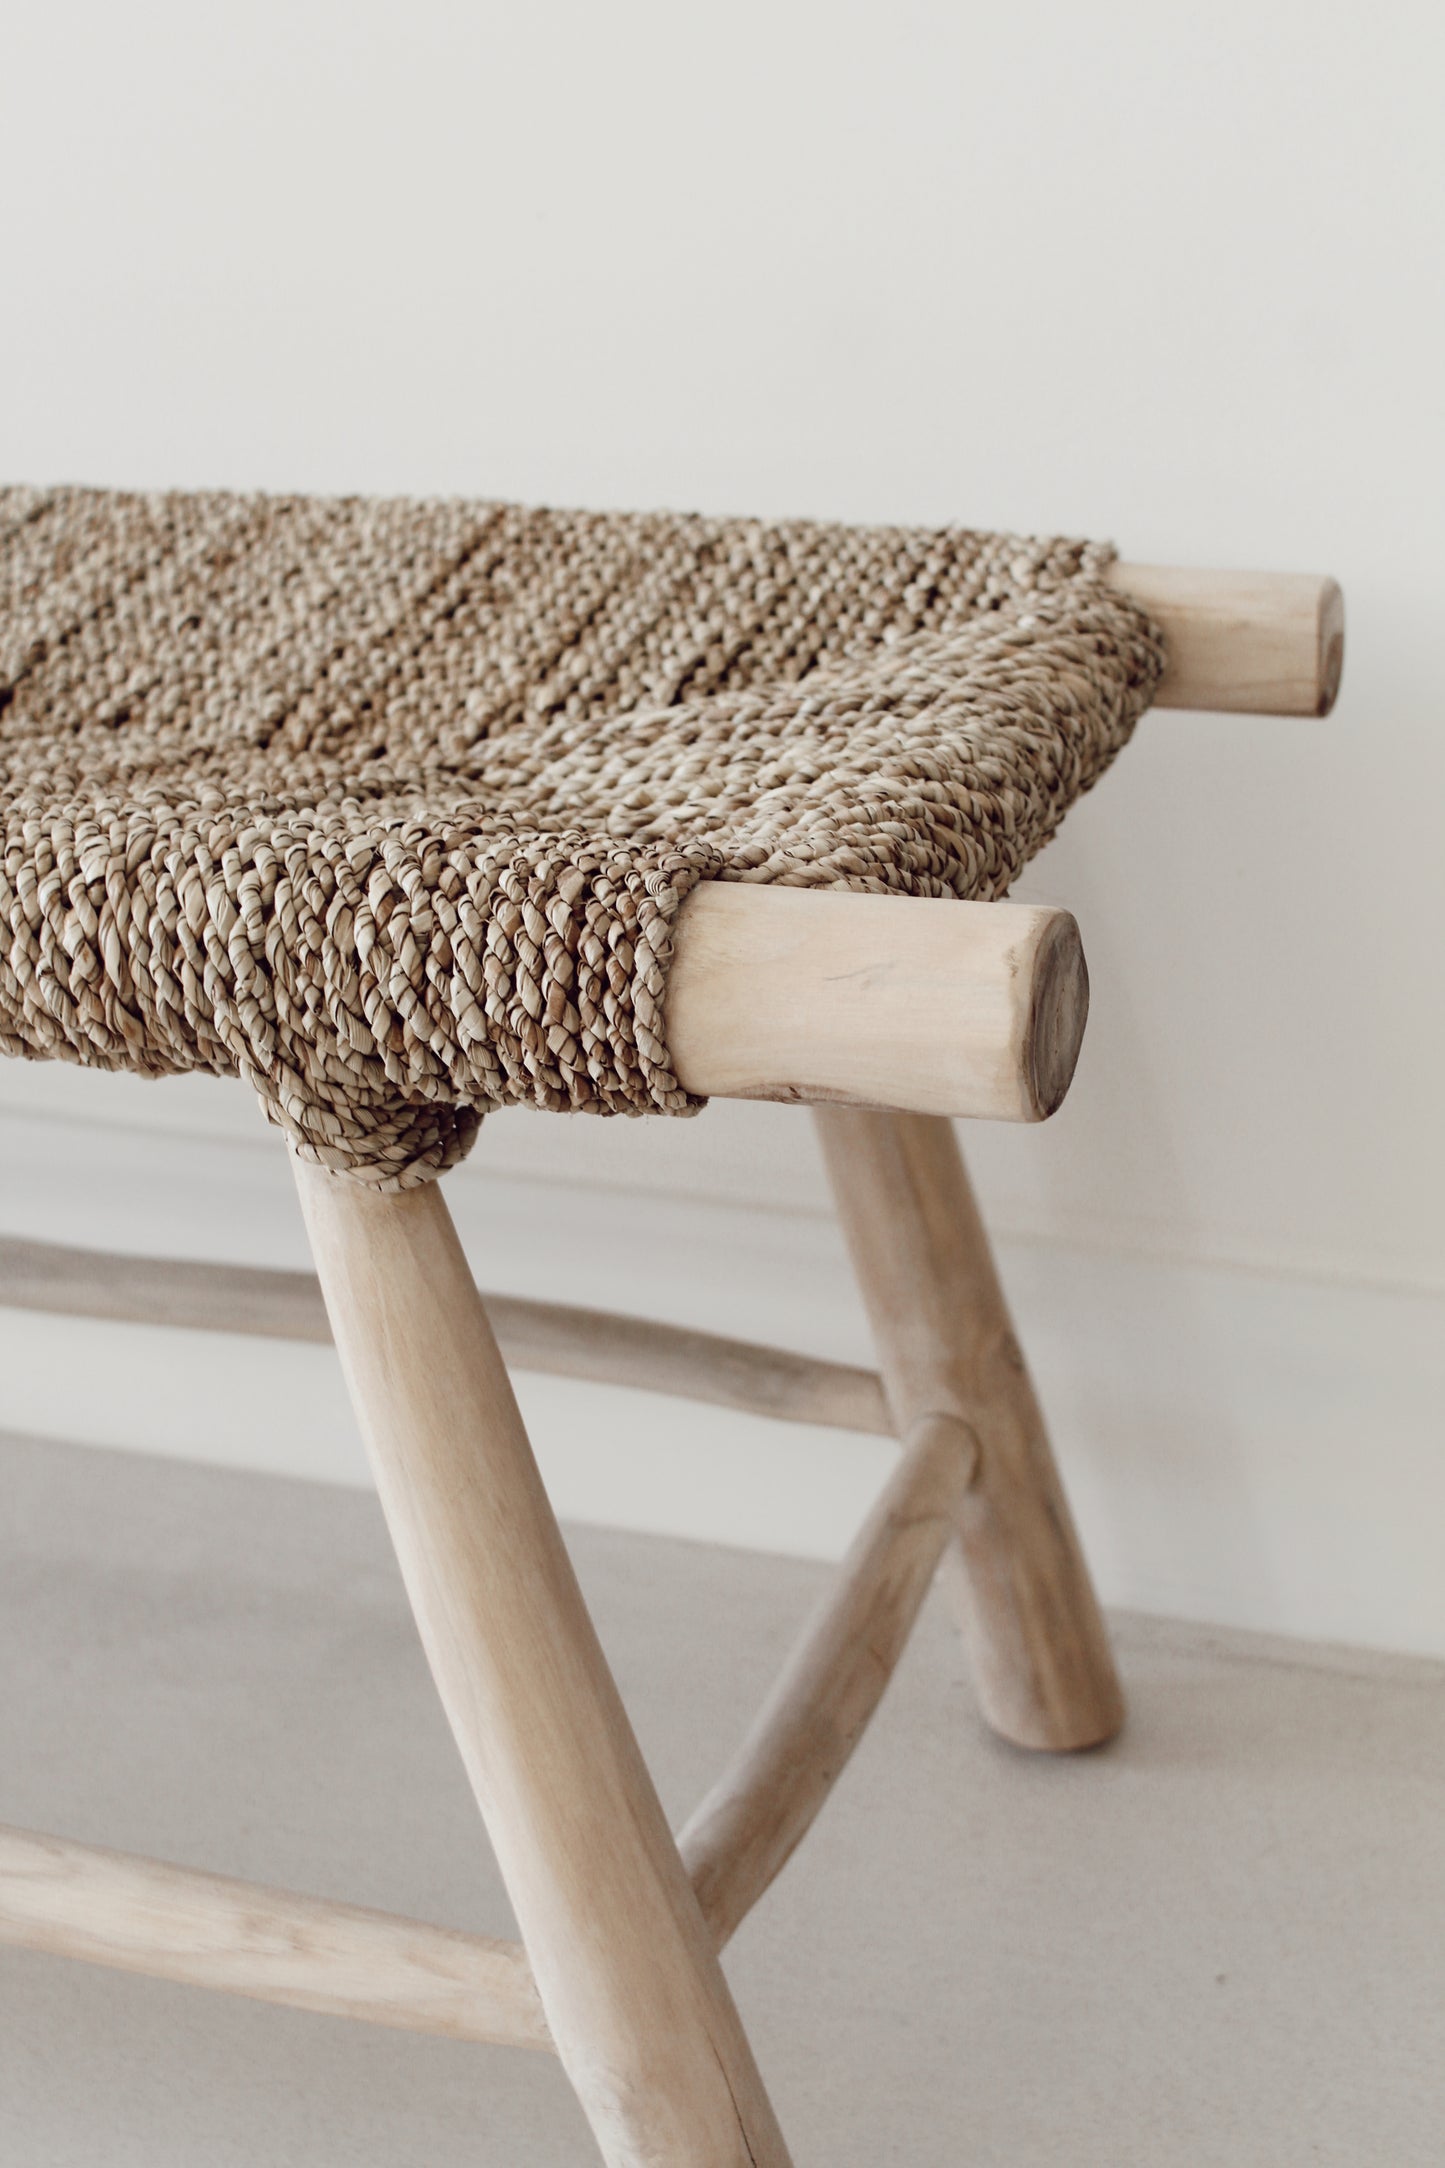 Seagrass bench